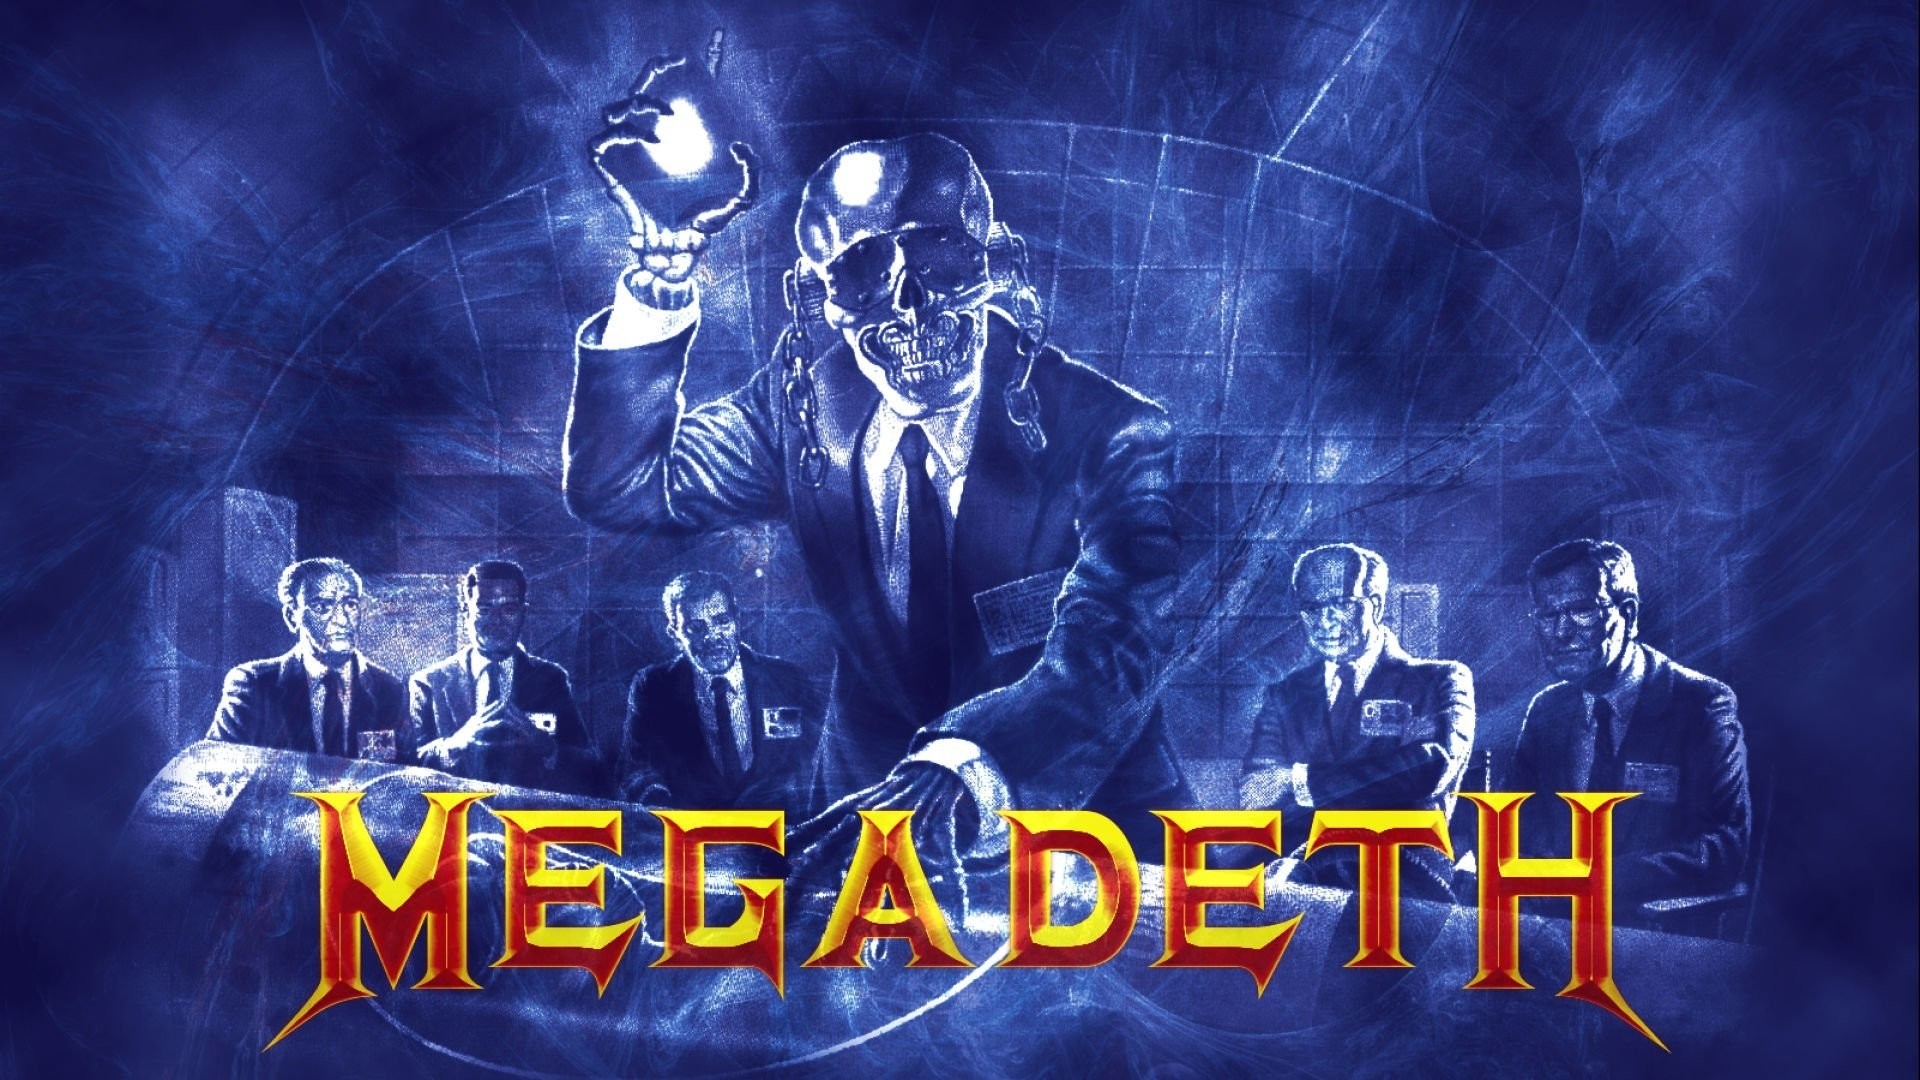 1920x1080 Dave Mustaine Says Megadeth Video Game is Coming – Horns Up! (VIDEO)